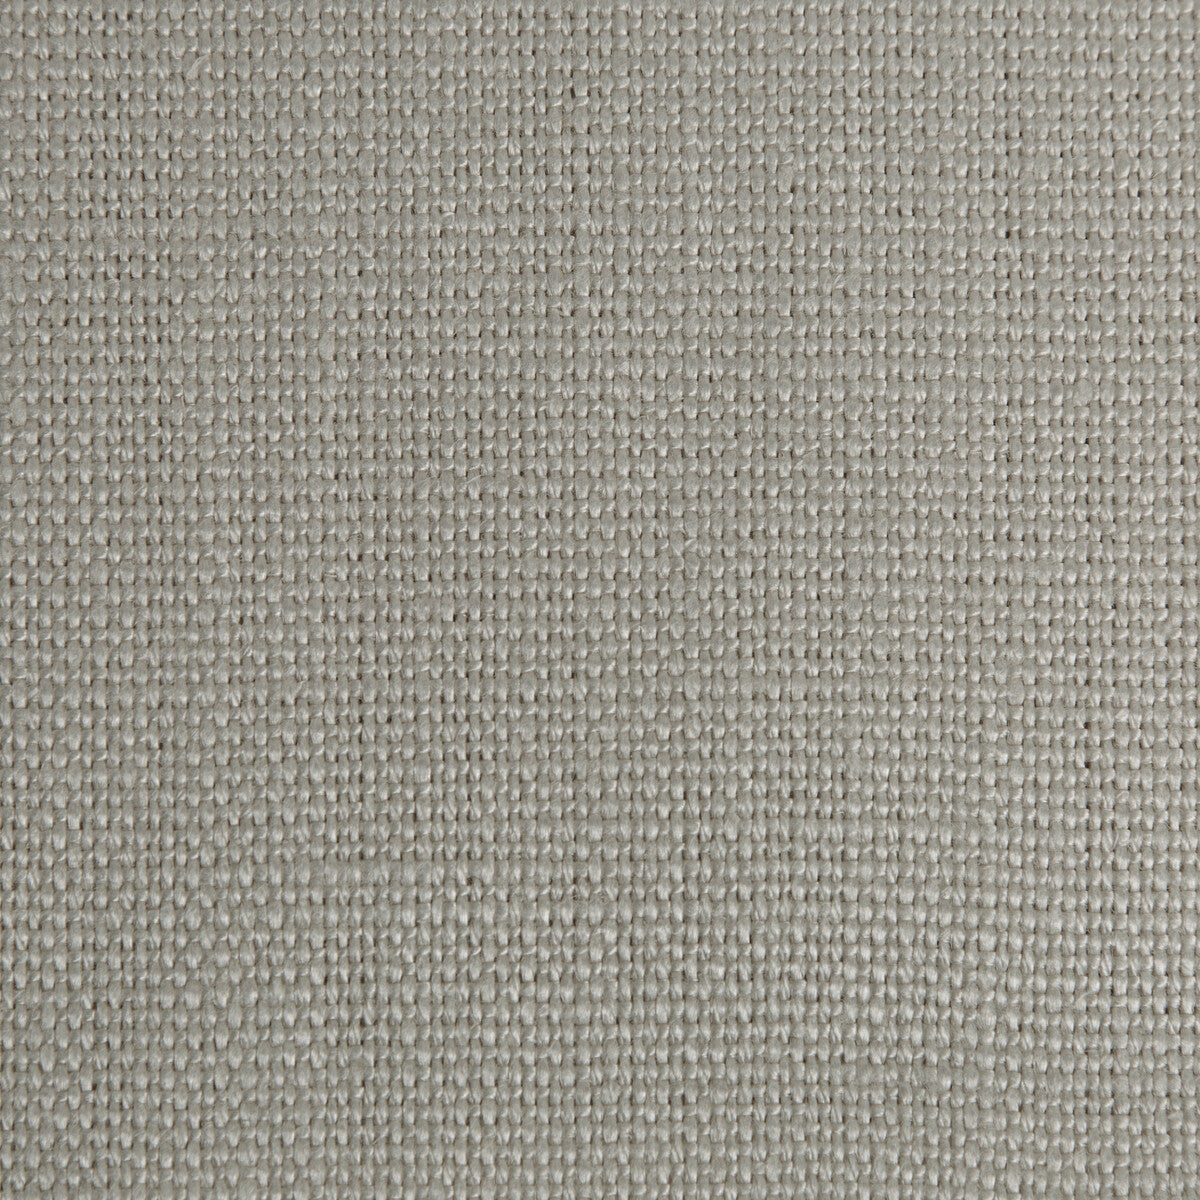 Kravet Couture fabric in 34813-2111 color - pattern 34813.2111.0 - by Kravet Couture in the Mabley Handler collection